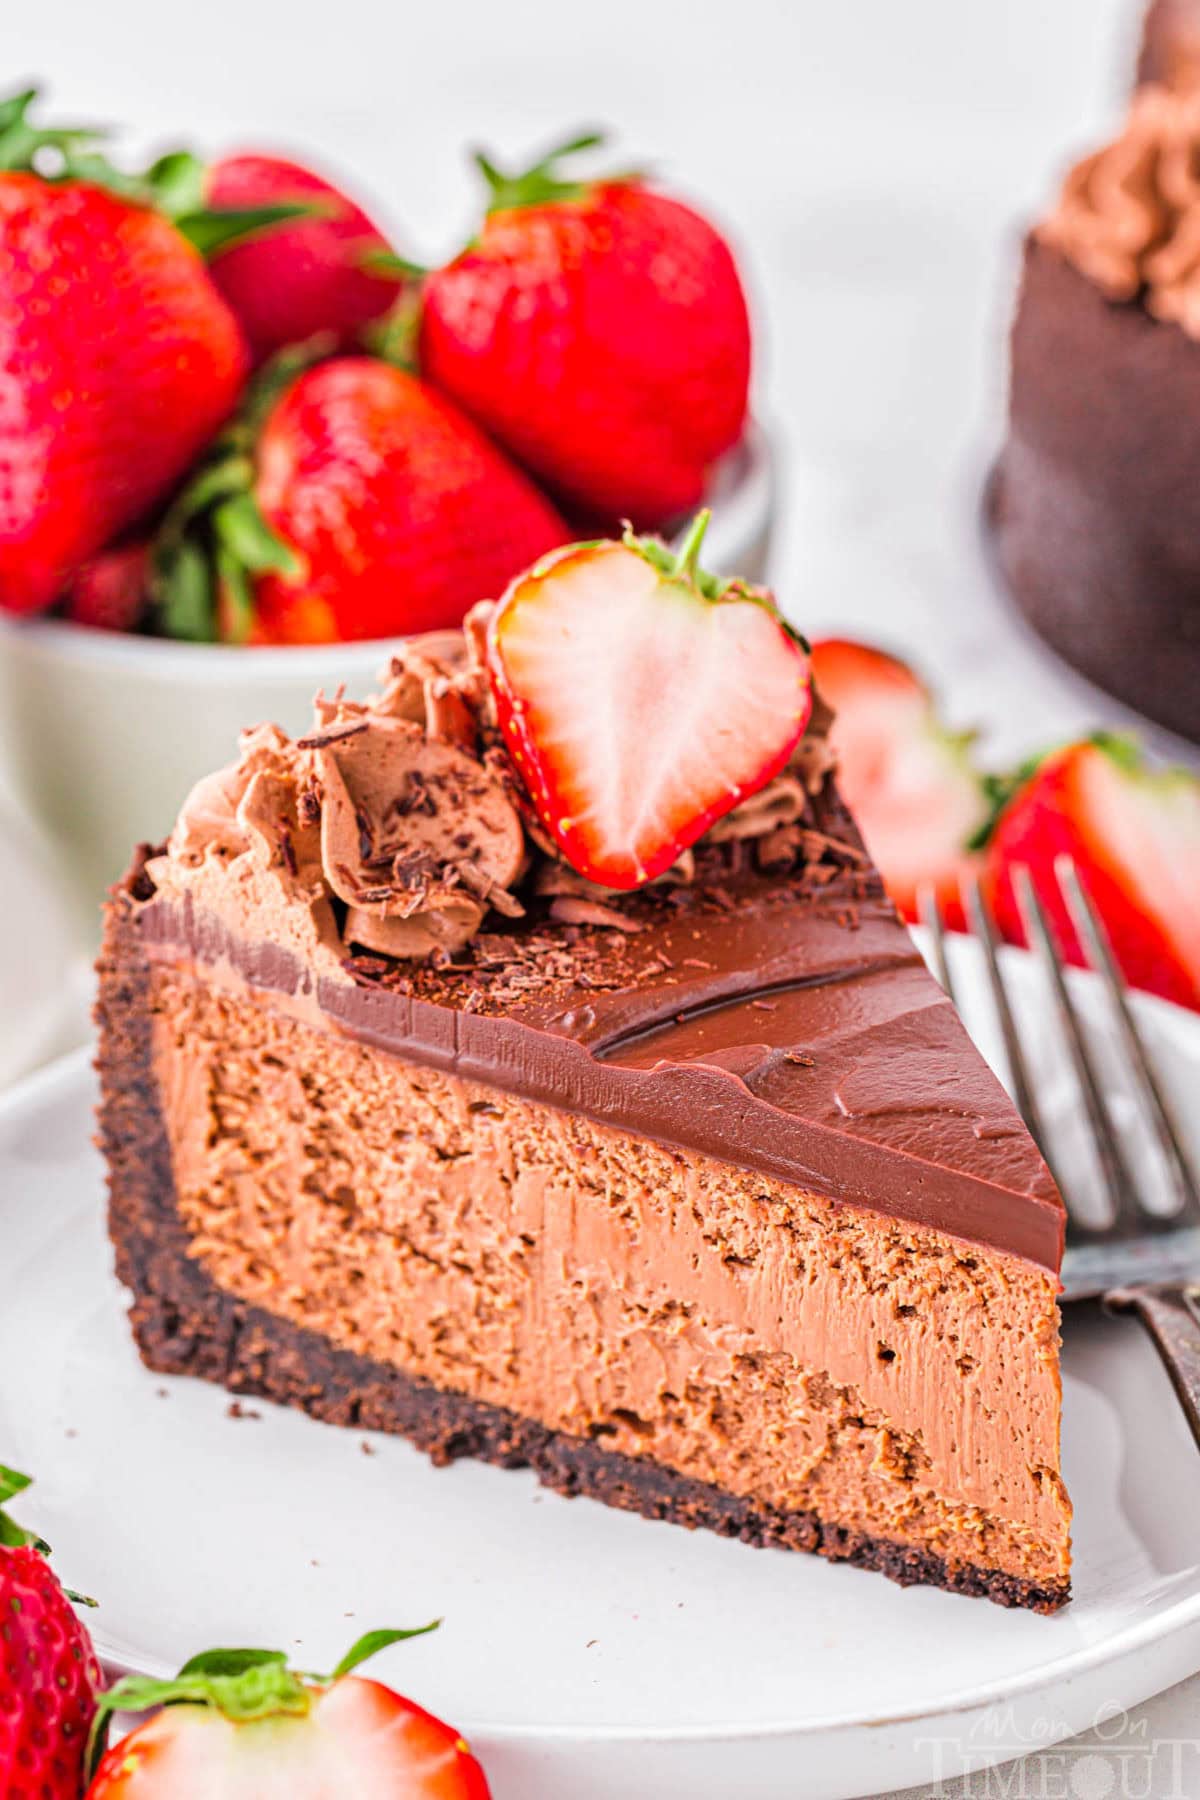 Slice of decadent chocolate cheesecake with an oreo crust and rich chocolate ganache on white round plate. Topped with chocolate shavings and fresh strawberries.